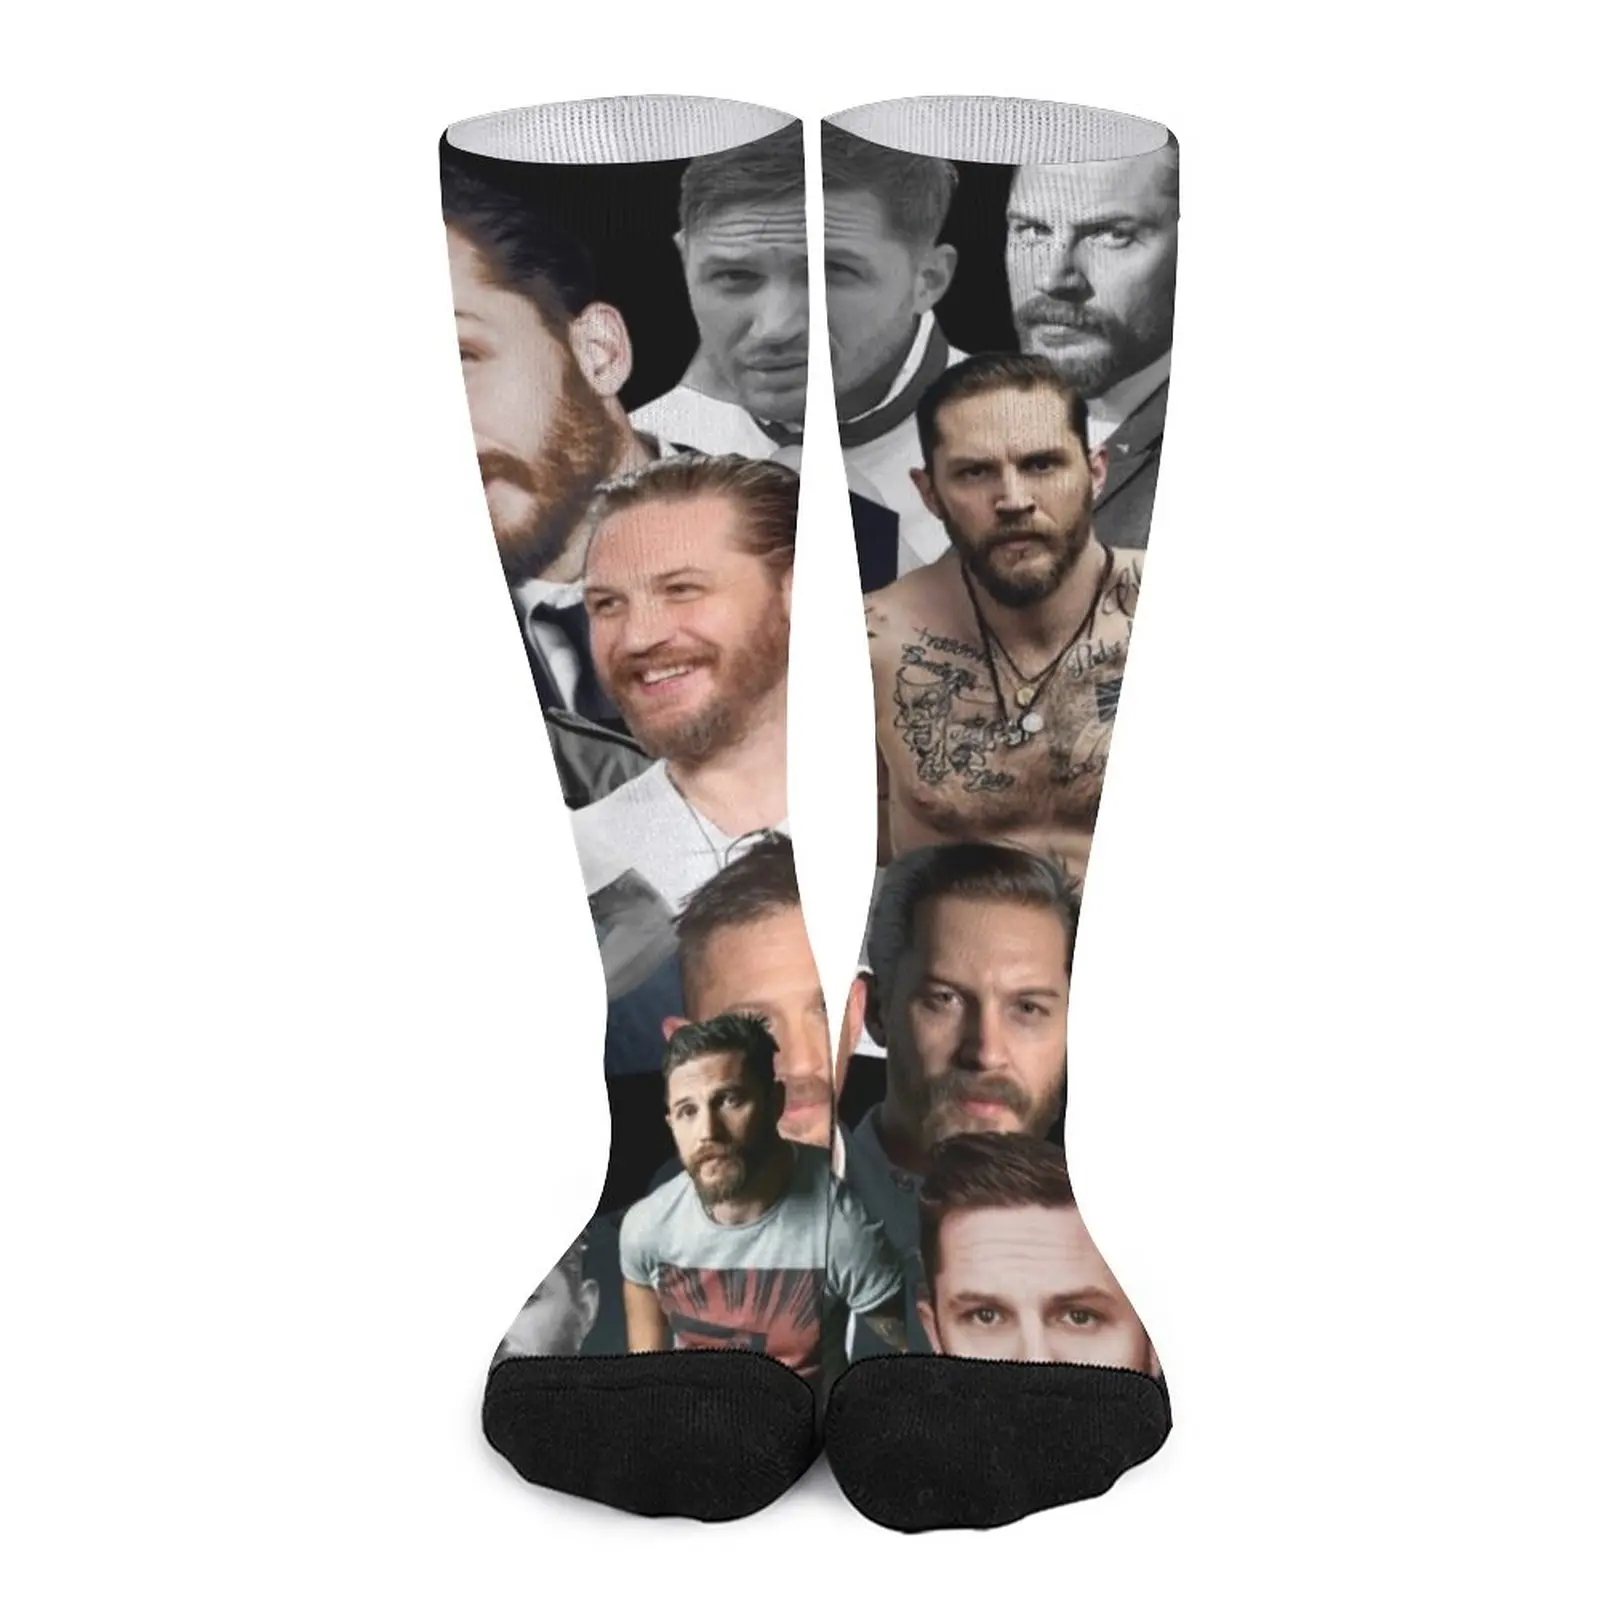 tom hardy photo collage Socks Sports socks socks for men Lots 30sheets pack vintage scrapbooking paper decor junk journal supplies collage photo album background paper stationery